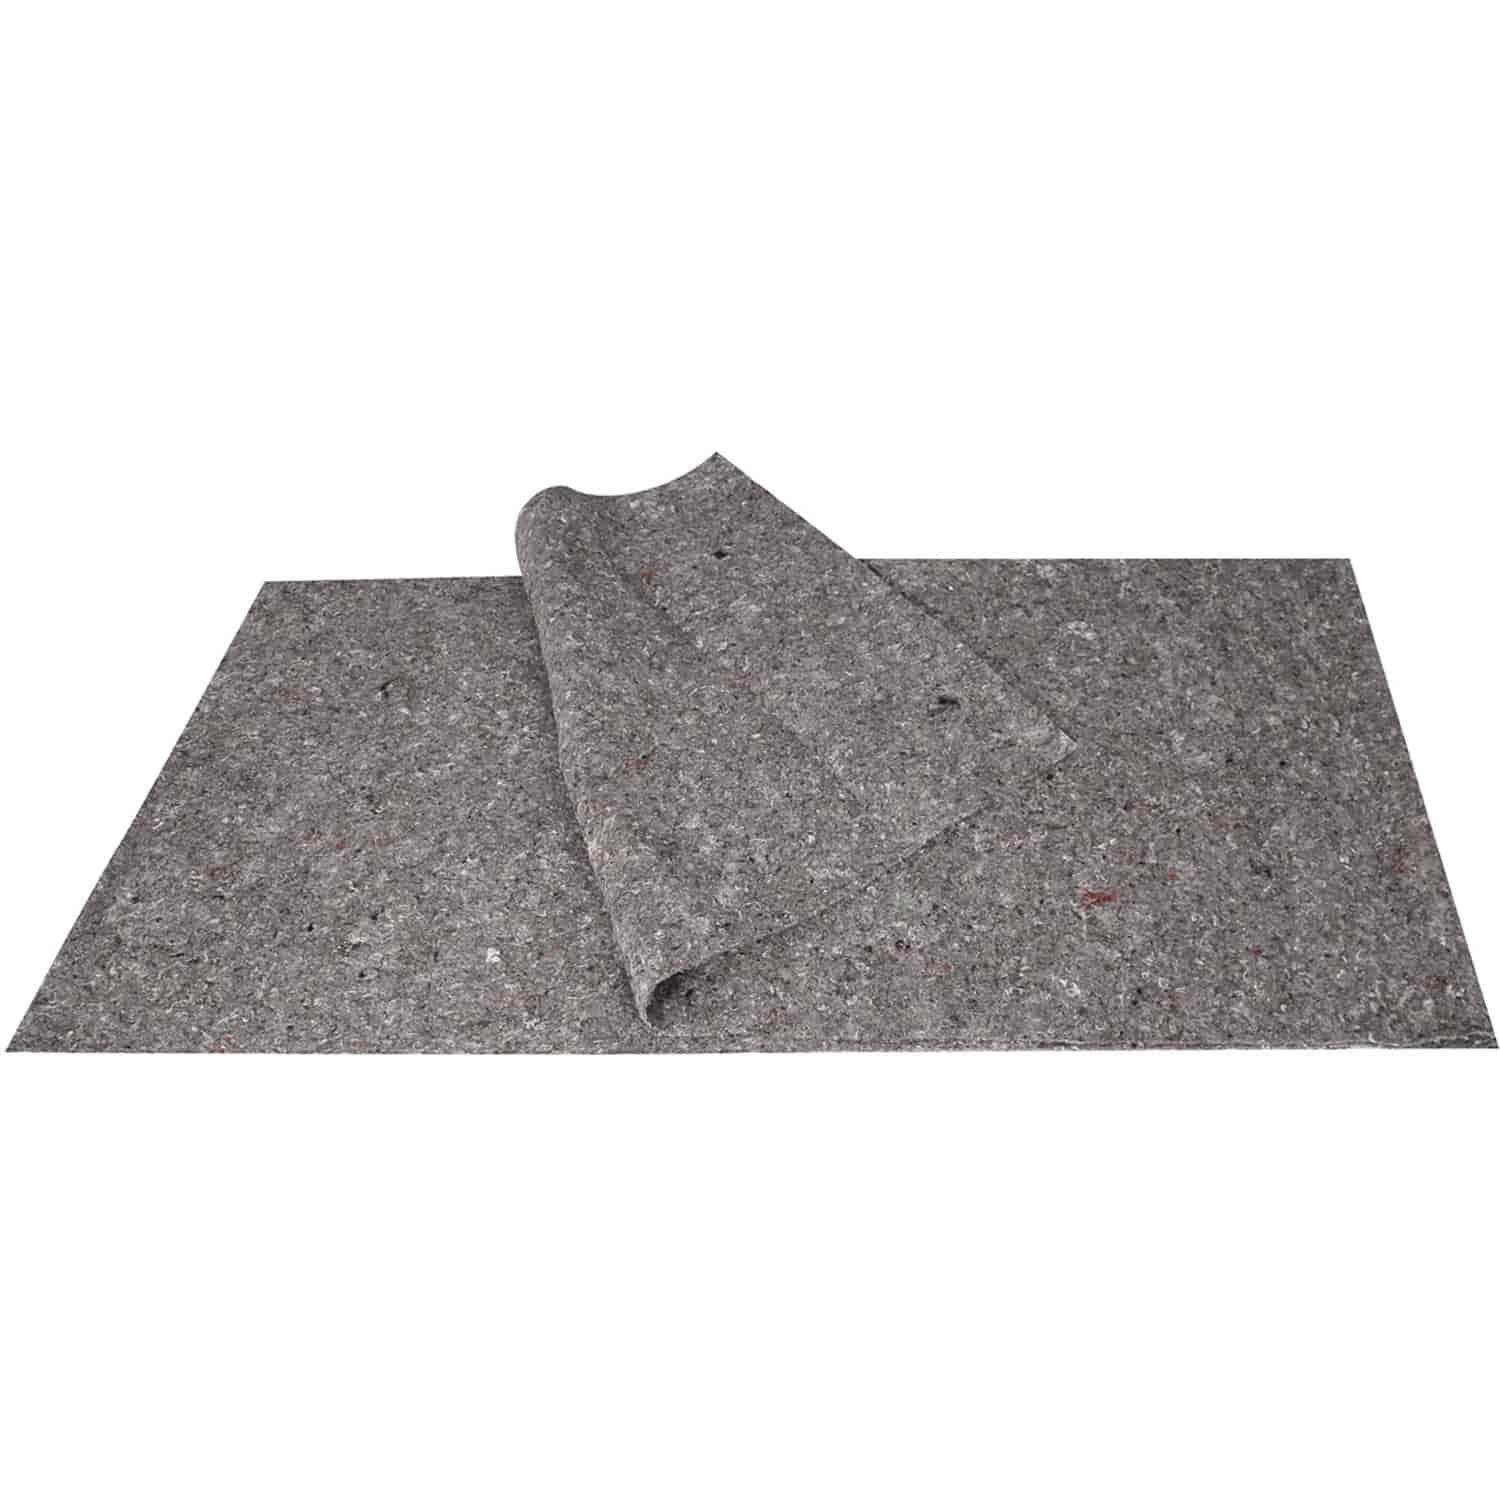 Insulation Headliner Fits Select 1938-2004 Cadillac Models [3/8